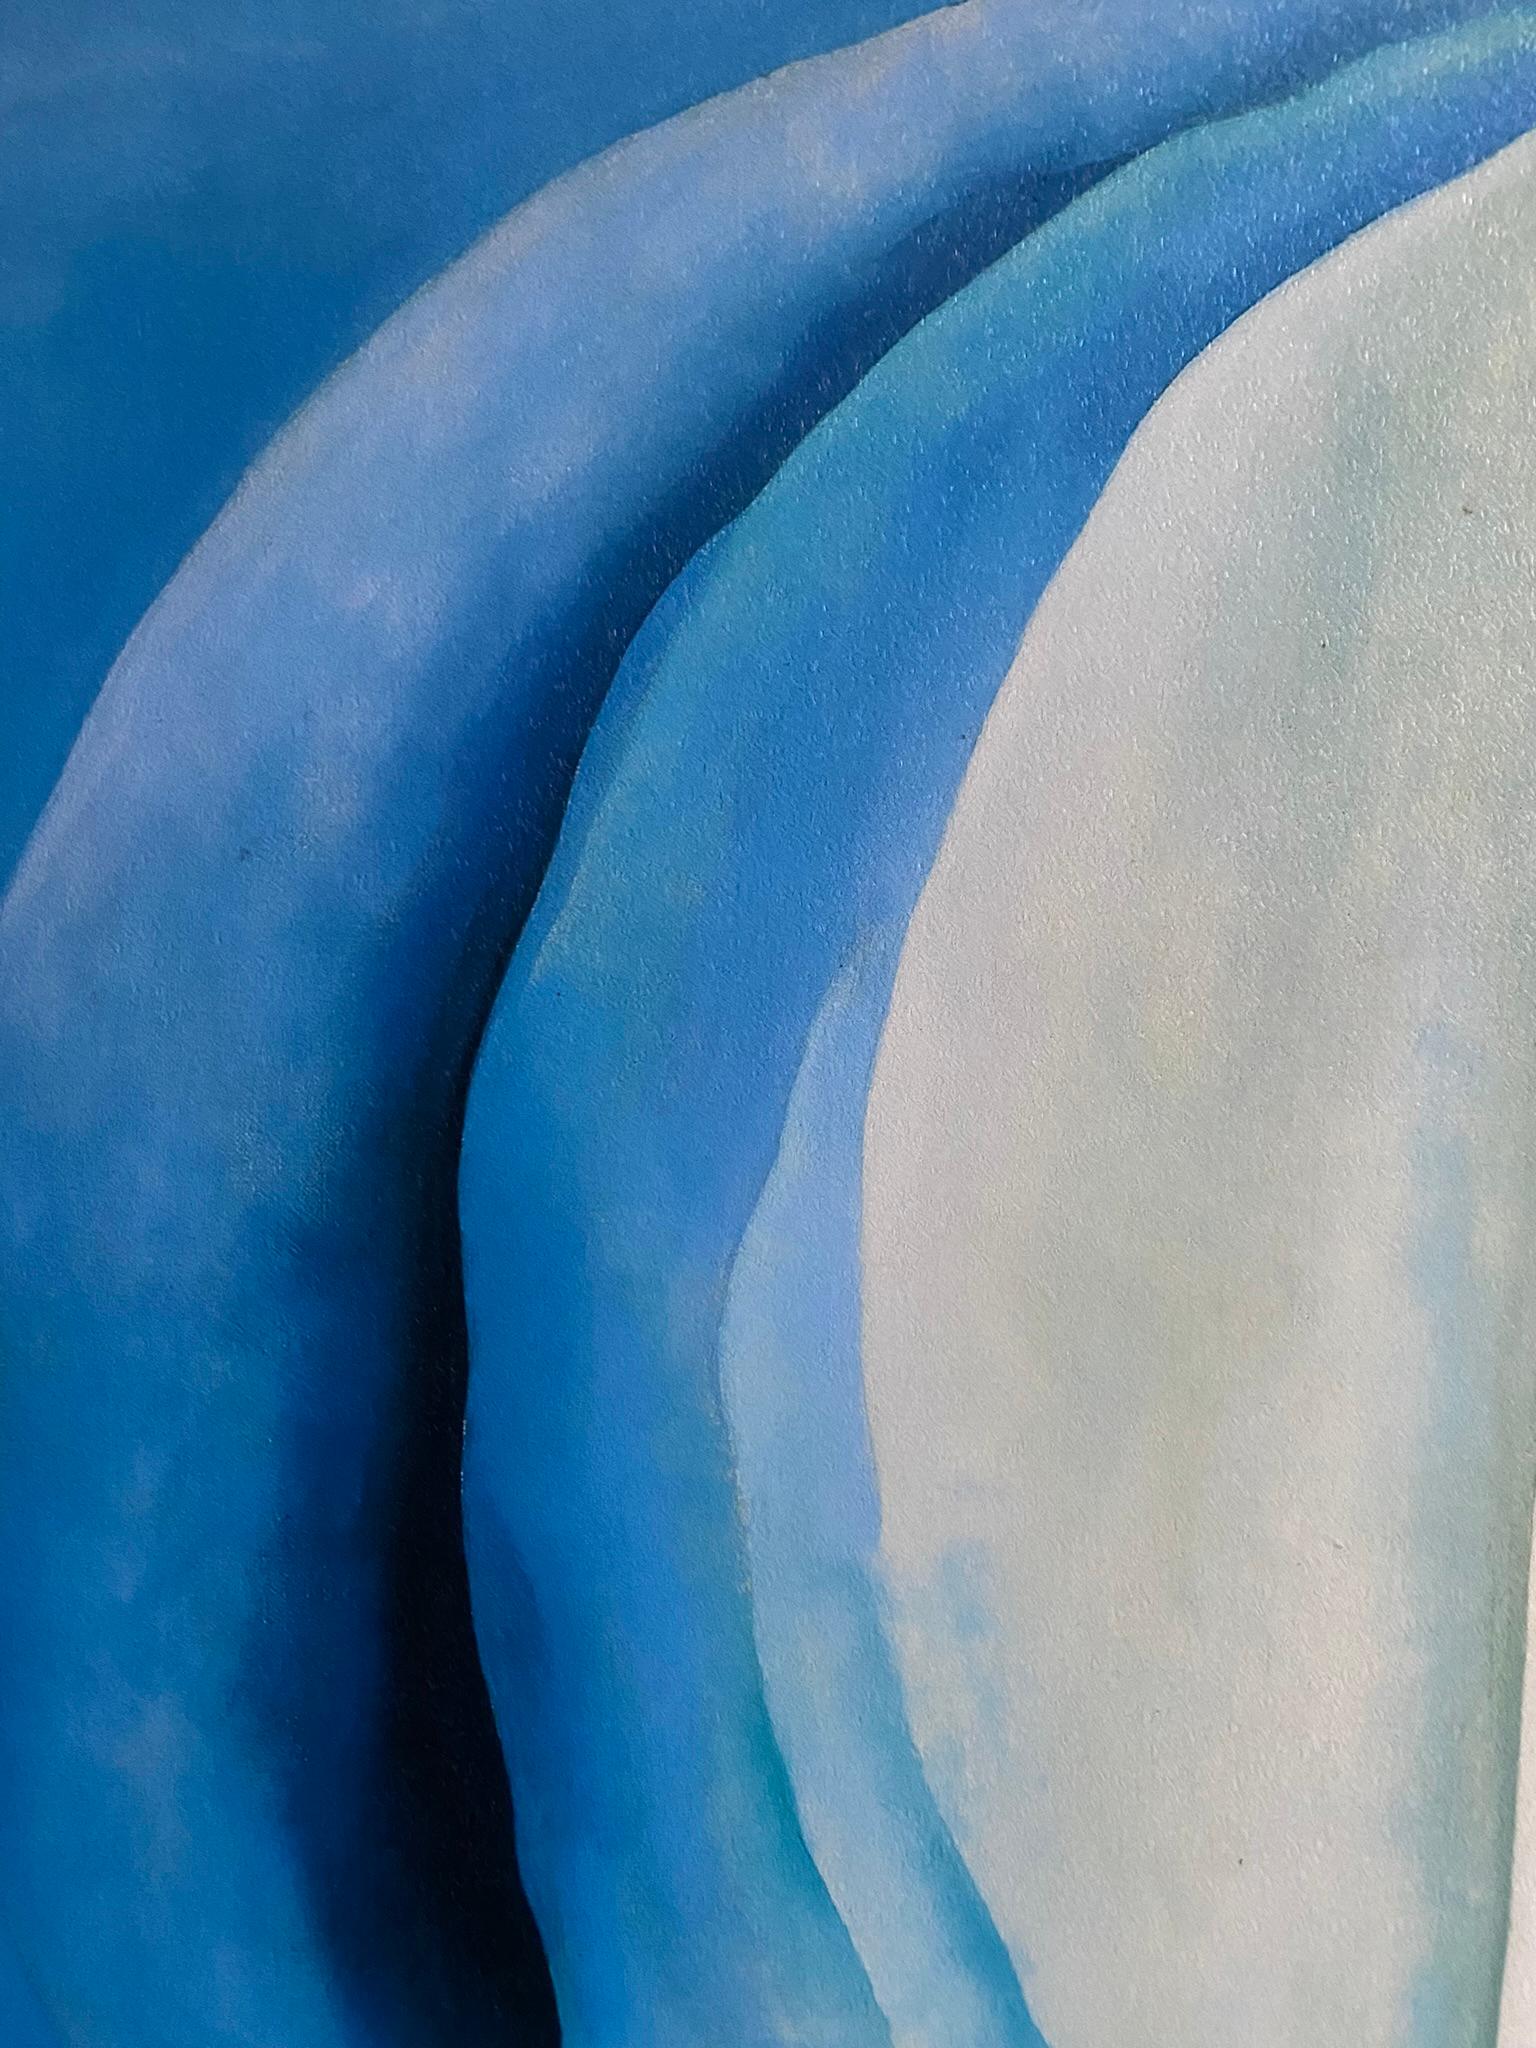 Georgia O'Keeffe-High Quality print by MoMA circa1997-Abstraction Blue-GSYStudio For Sale 5